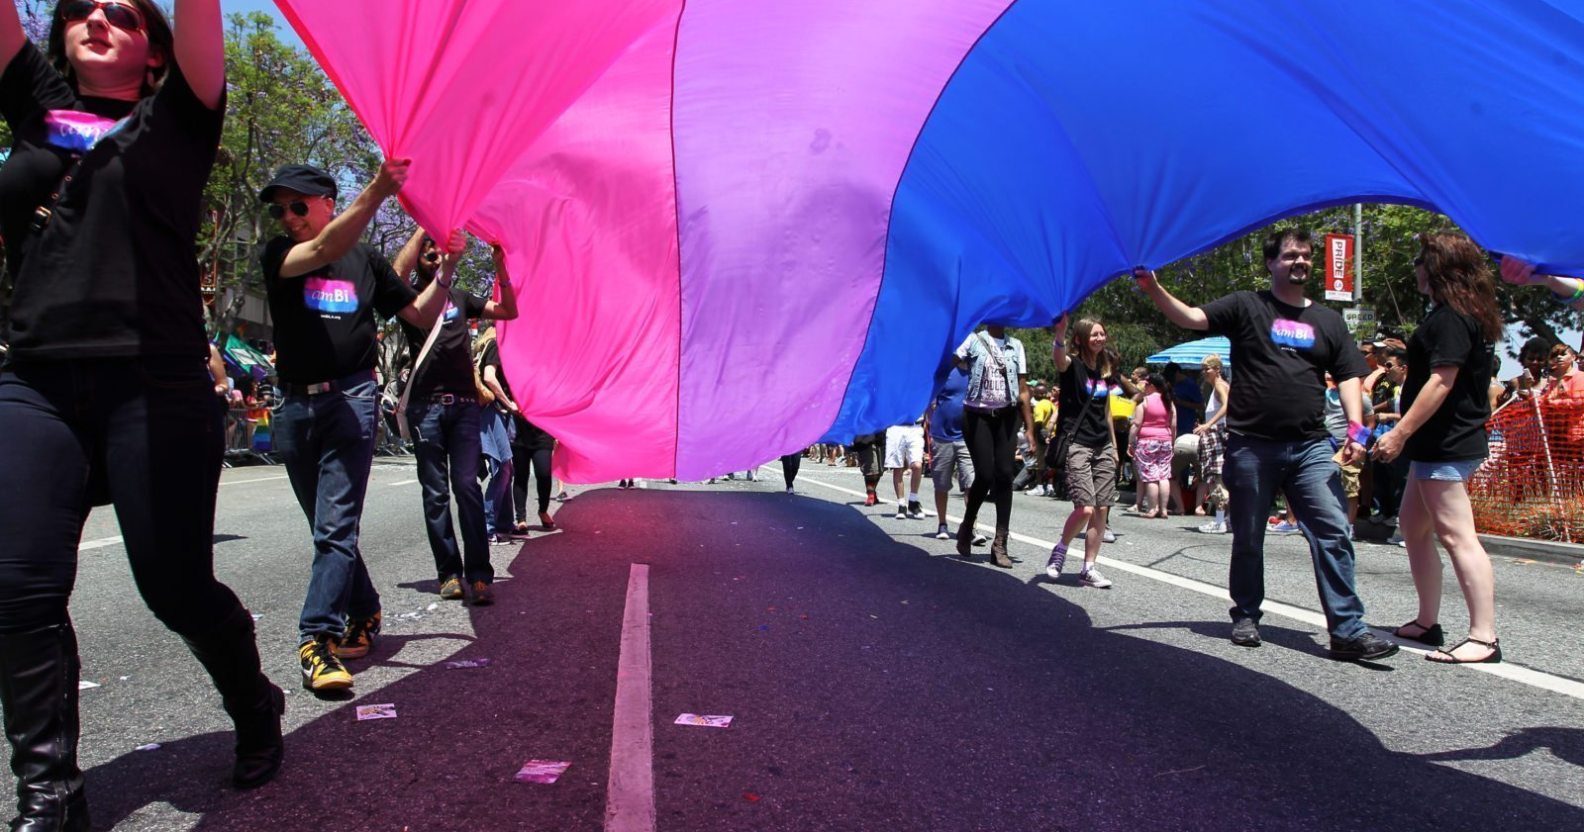 WEST HOLLYWOOD, CA - JUNE 09: People marching with anBi, a bisexual organization, carry a bisexual flag in the 43rd L.A. Pride Parade on June 9, 2013 in West Hollywood, California. More than 400,000 people are expected to attend the parade in support of lesbian, gay, bisexual and transgender communities. (Photo by David McNew/Getty Images)